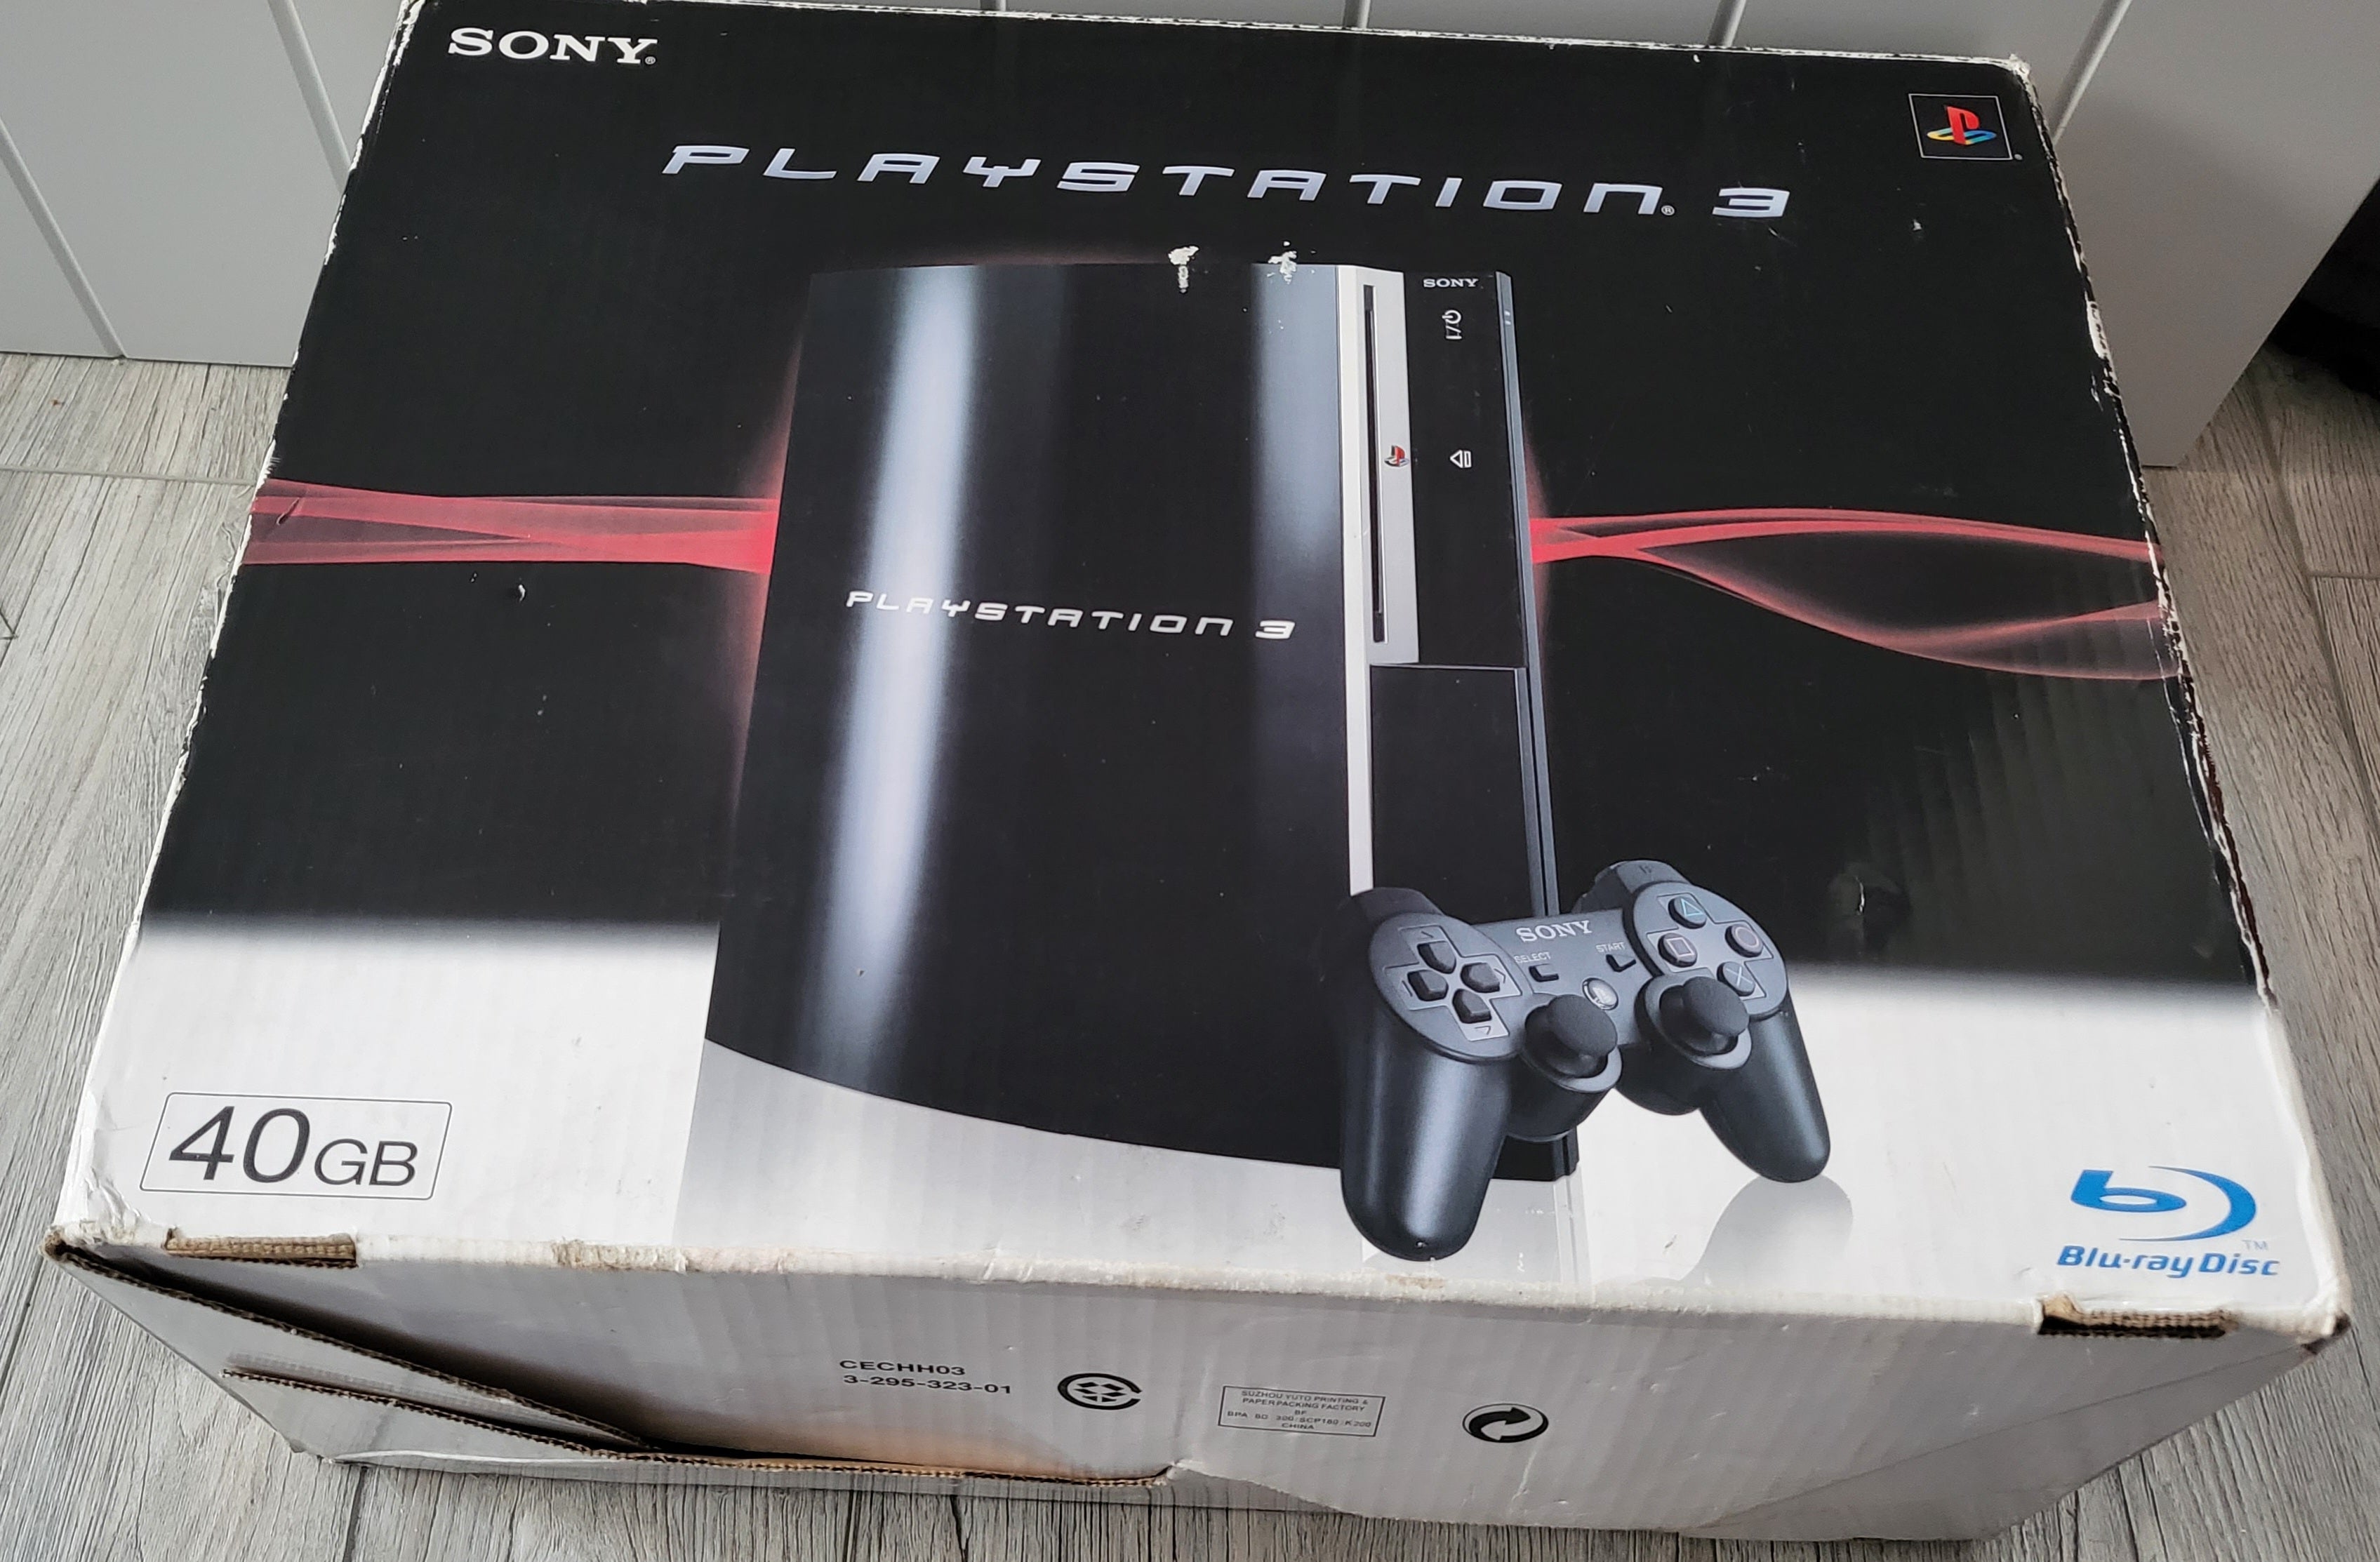 Boxed Sony Playstation 3 (PS3) Cechh03 40 GB Console – Retro 